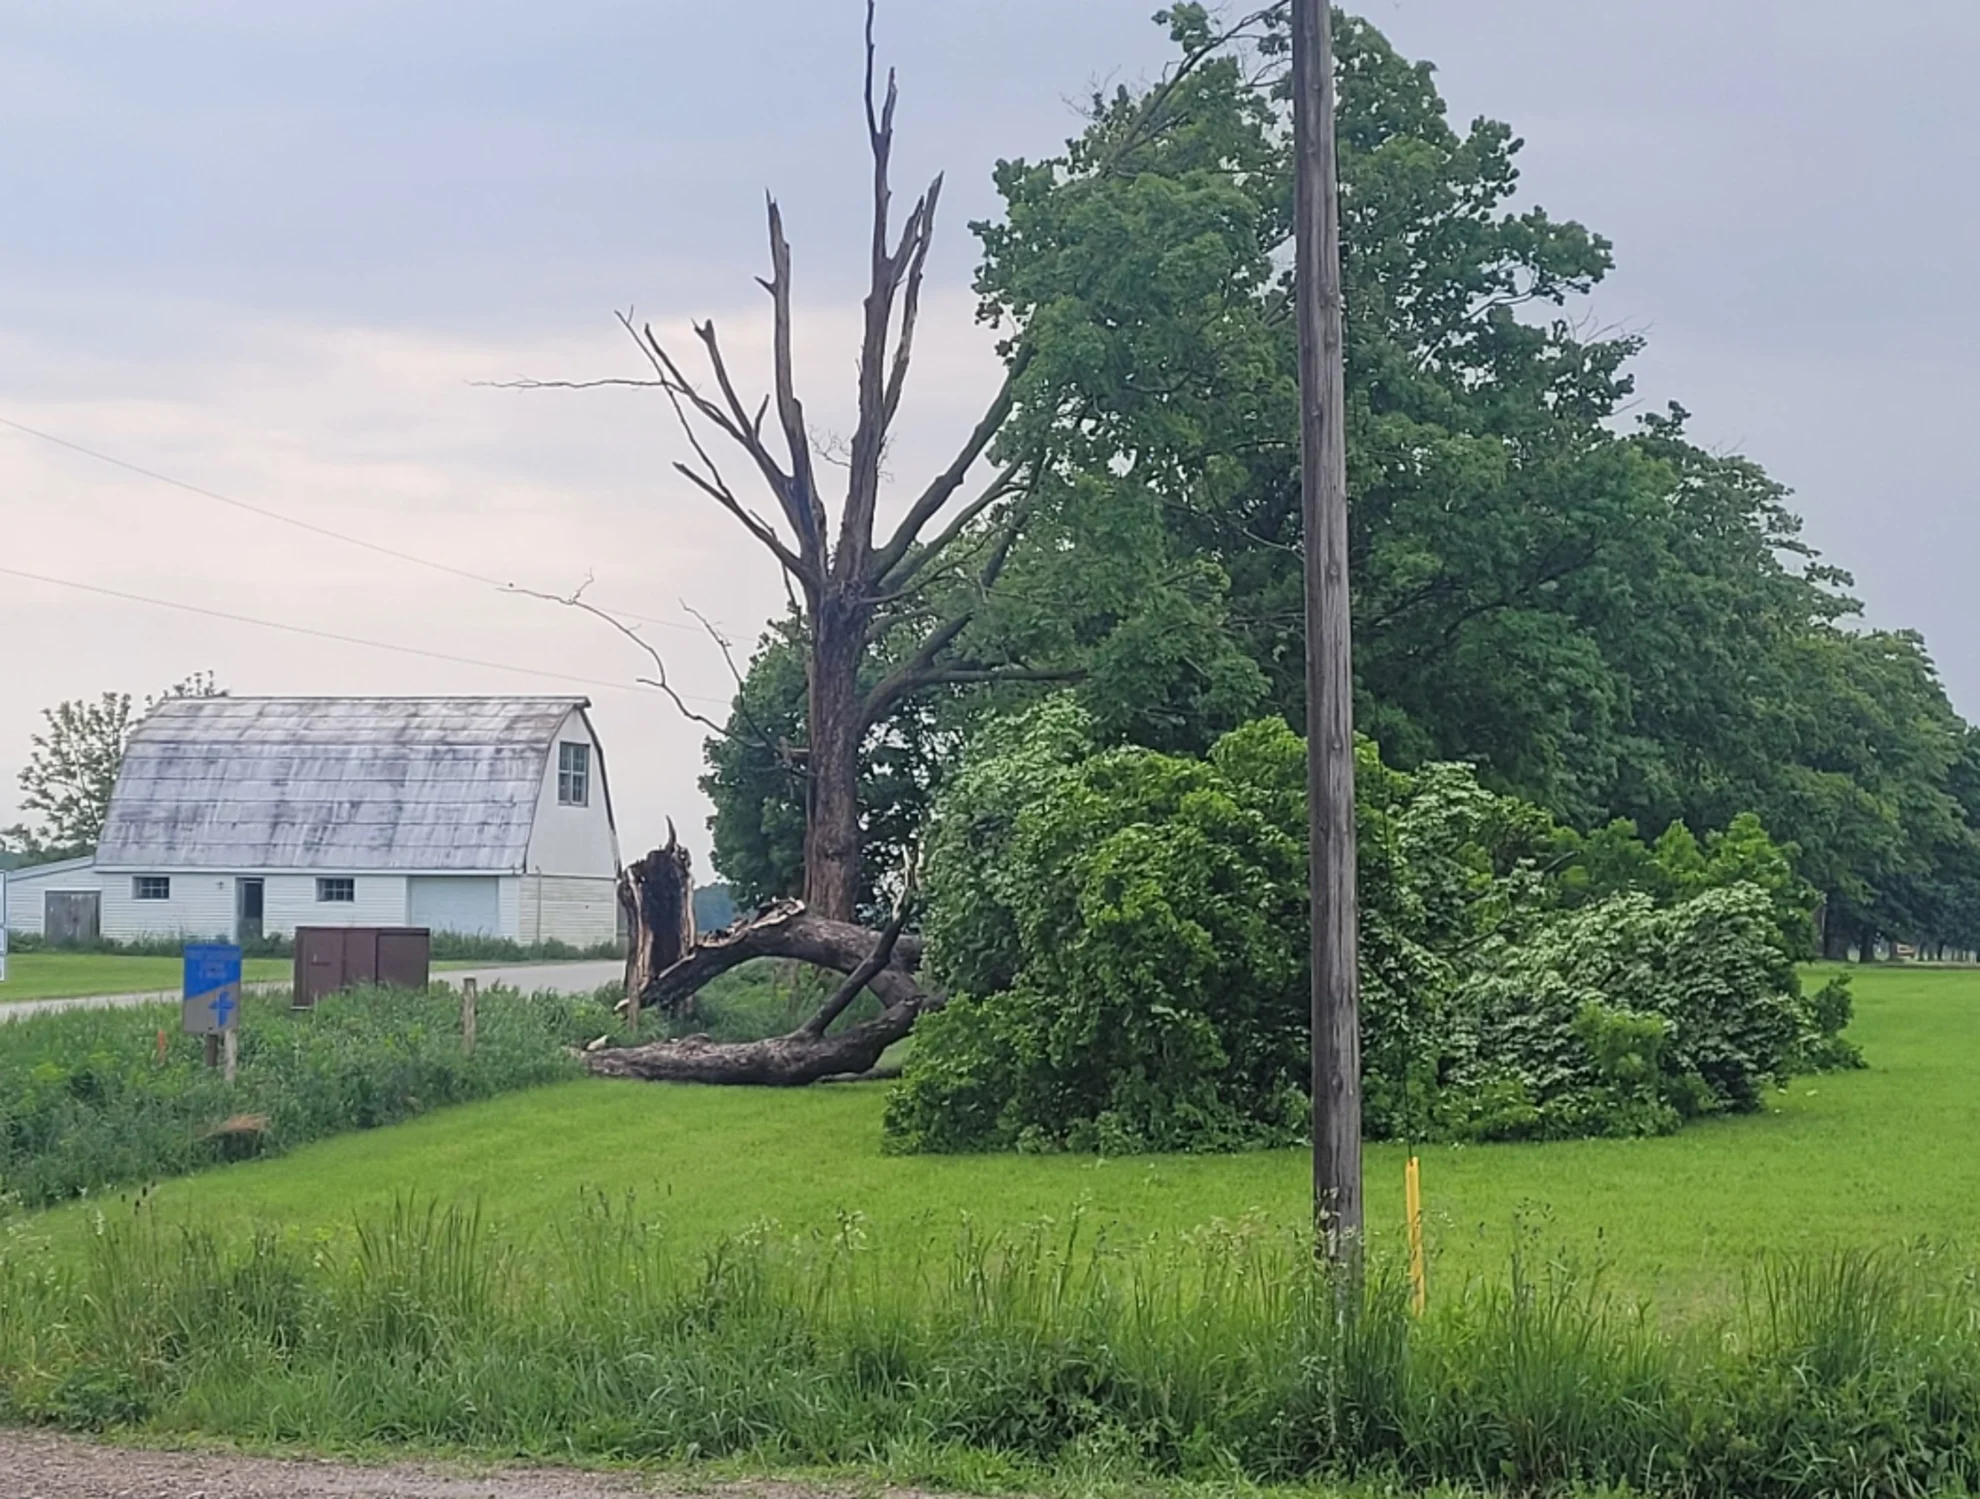 PHOTOS: Tornado reported with Monday's damaging storms across Ontario and Quebec